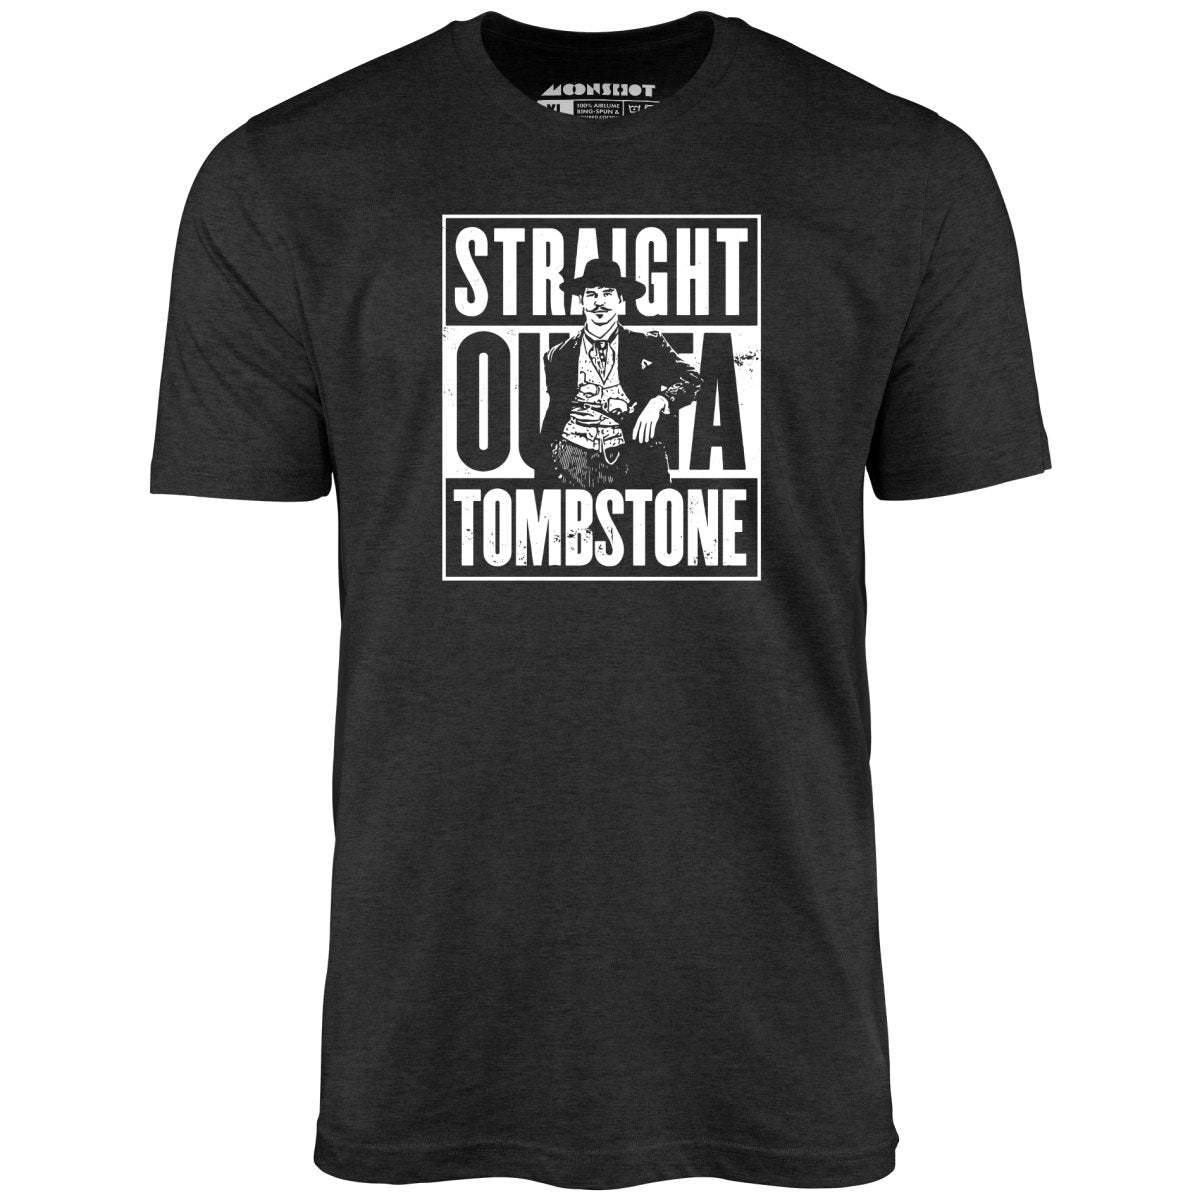 Straight Outta Tombstone - Unisex T-Shirt